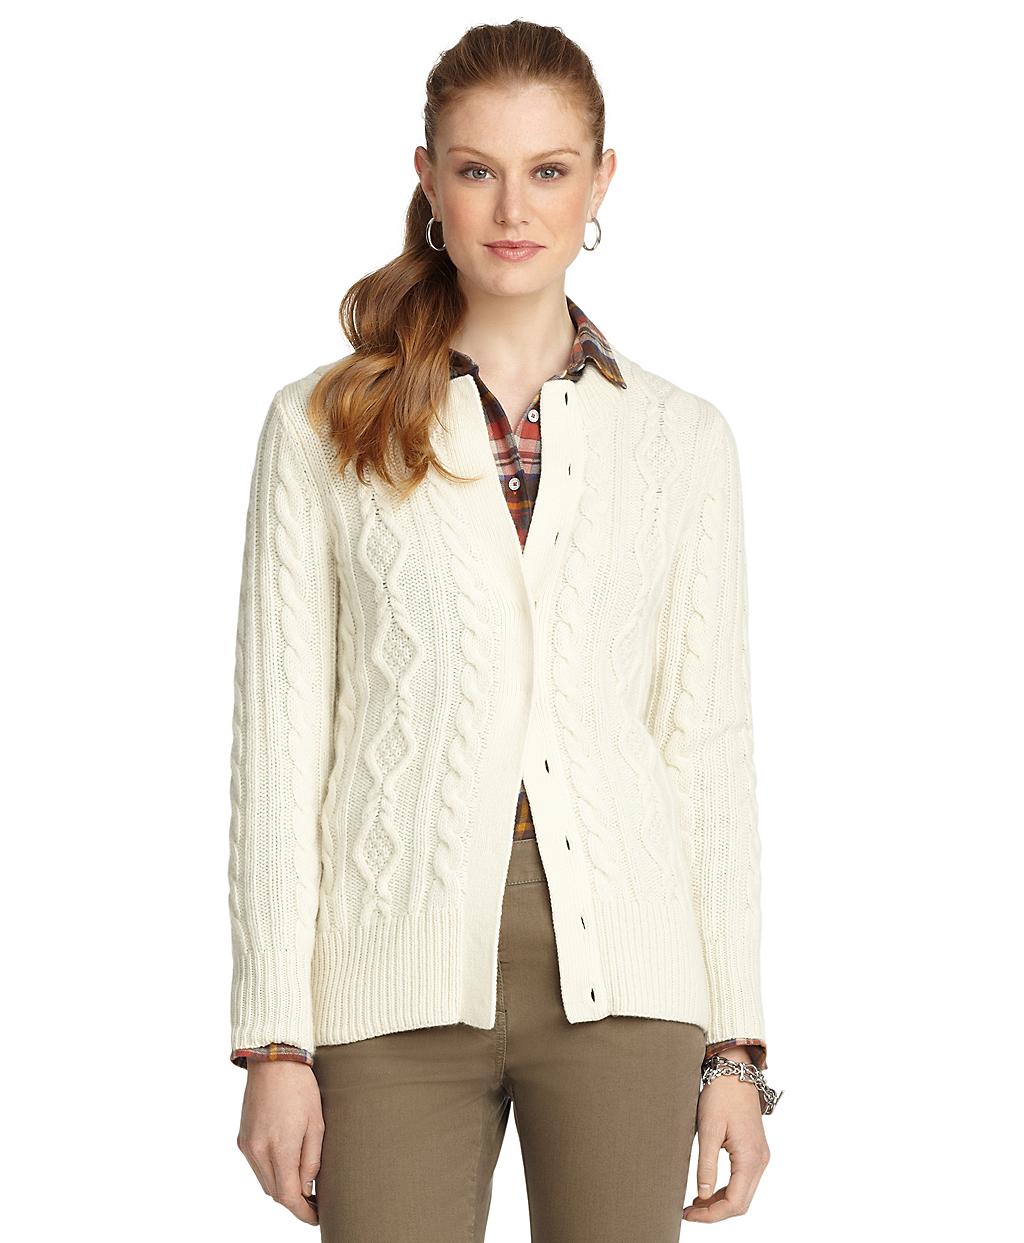 Online marks and spencer long cardigan pockets homecoming